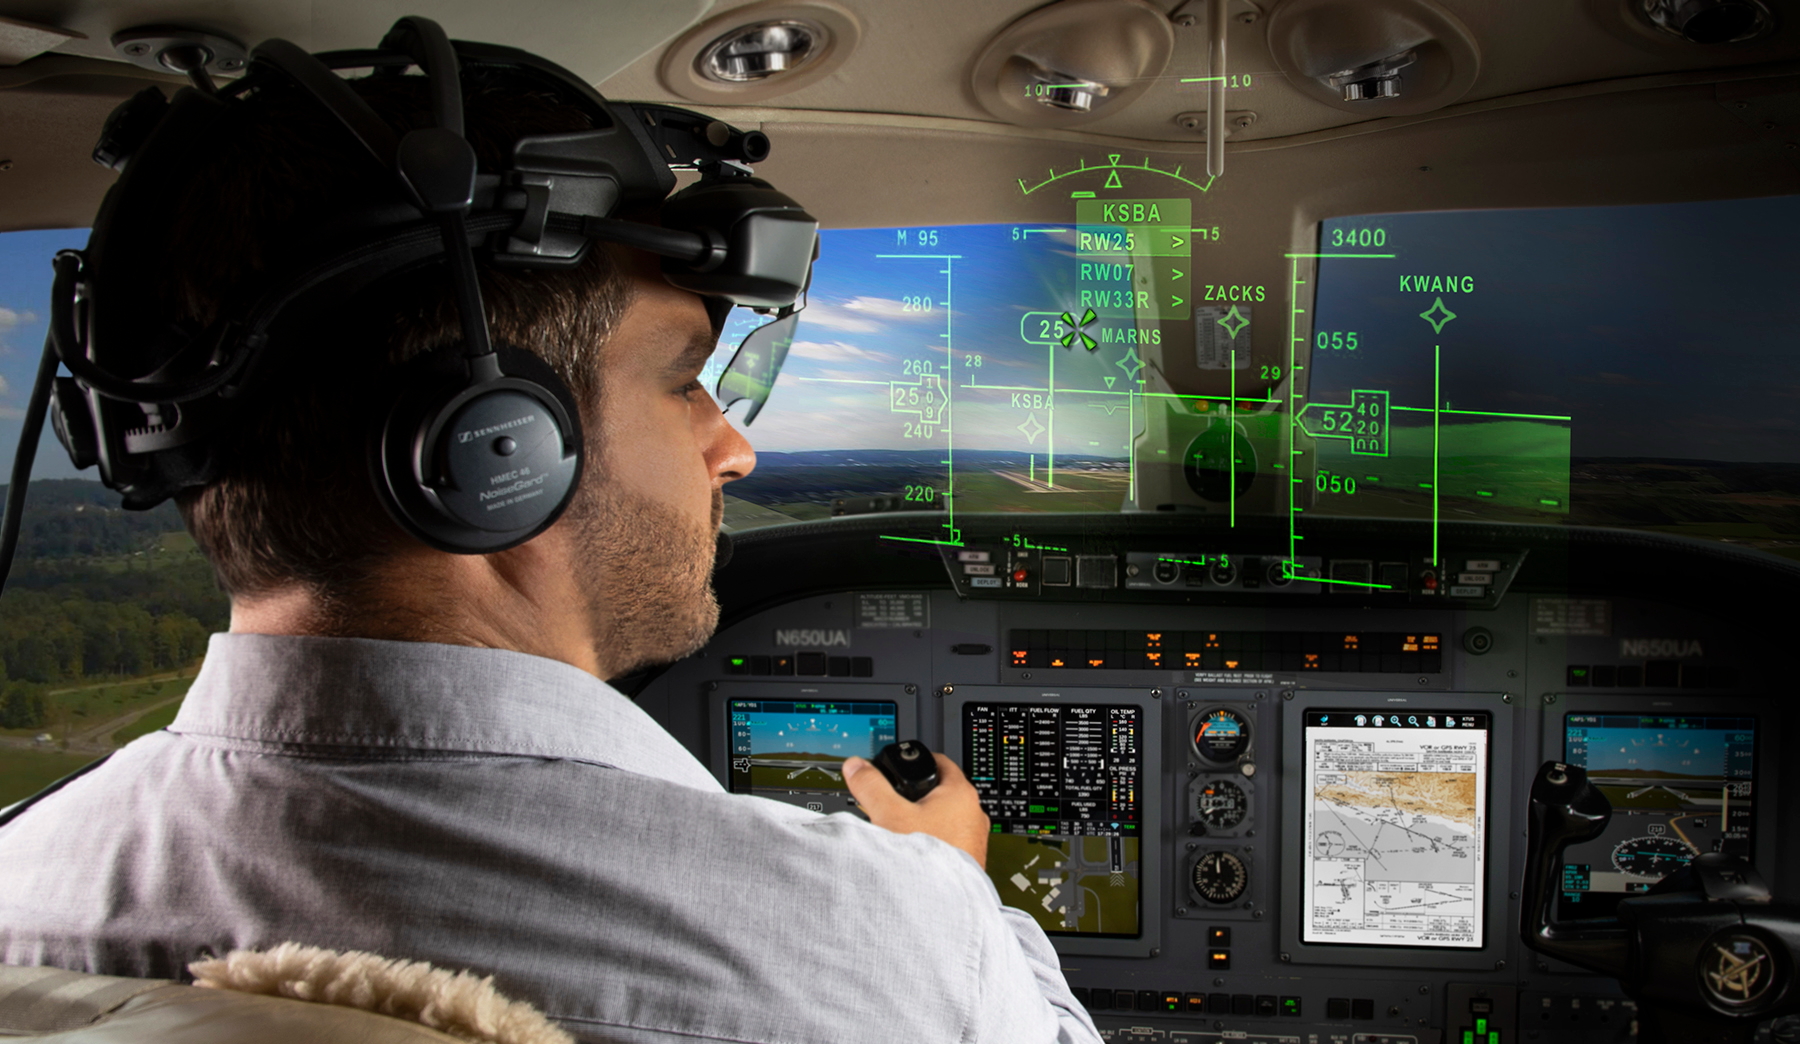 Universal Avionics (UA), a subsidiary of Elbit Systems, unveiled a new ‘Head-Up, Head-Down’ flight deck system at NBAA-BACE 2018 yesterday. The new system is based on the integration of the InSight Display System and the SkyLens wearable Head-Up Display. Click to enlarge.